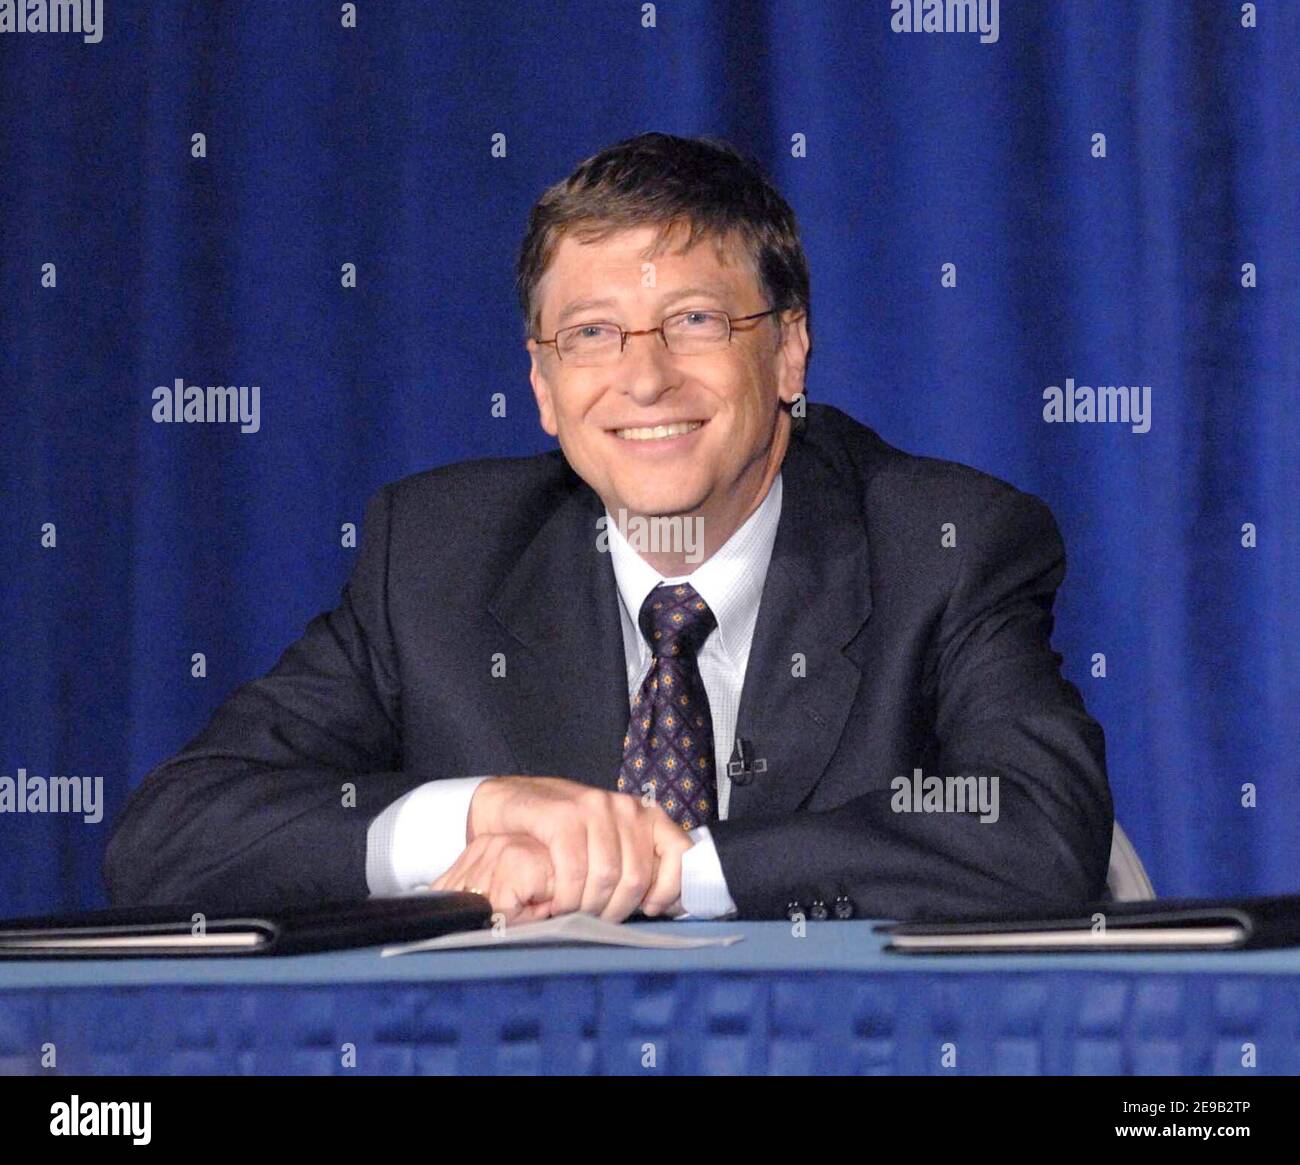 Bill Gates attends the press conference to announce Warren Buffett's pledged gift of $31 billion, to the Bill and Melinda Gates Foundation, held in New York City, NY, USA on June 26, 2006. Photo by David Miller/ABACAPRESS.COM Stock Photo